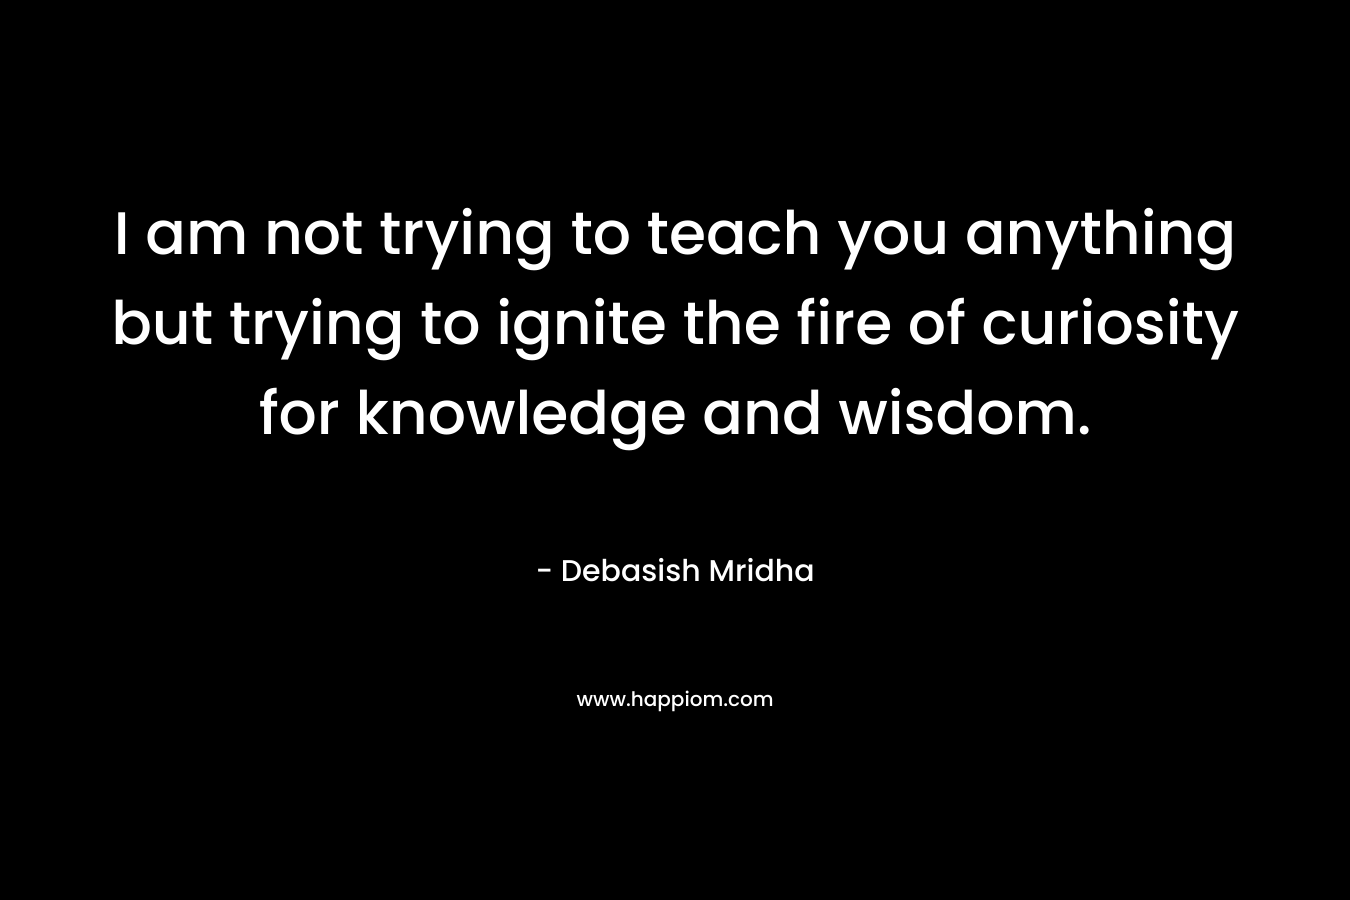 I am not trying to teach you anything but trying to ignite the fire of curiosity for knowledge and wisdom.